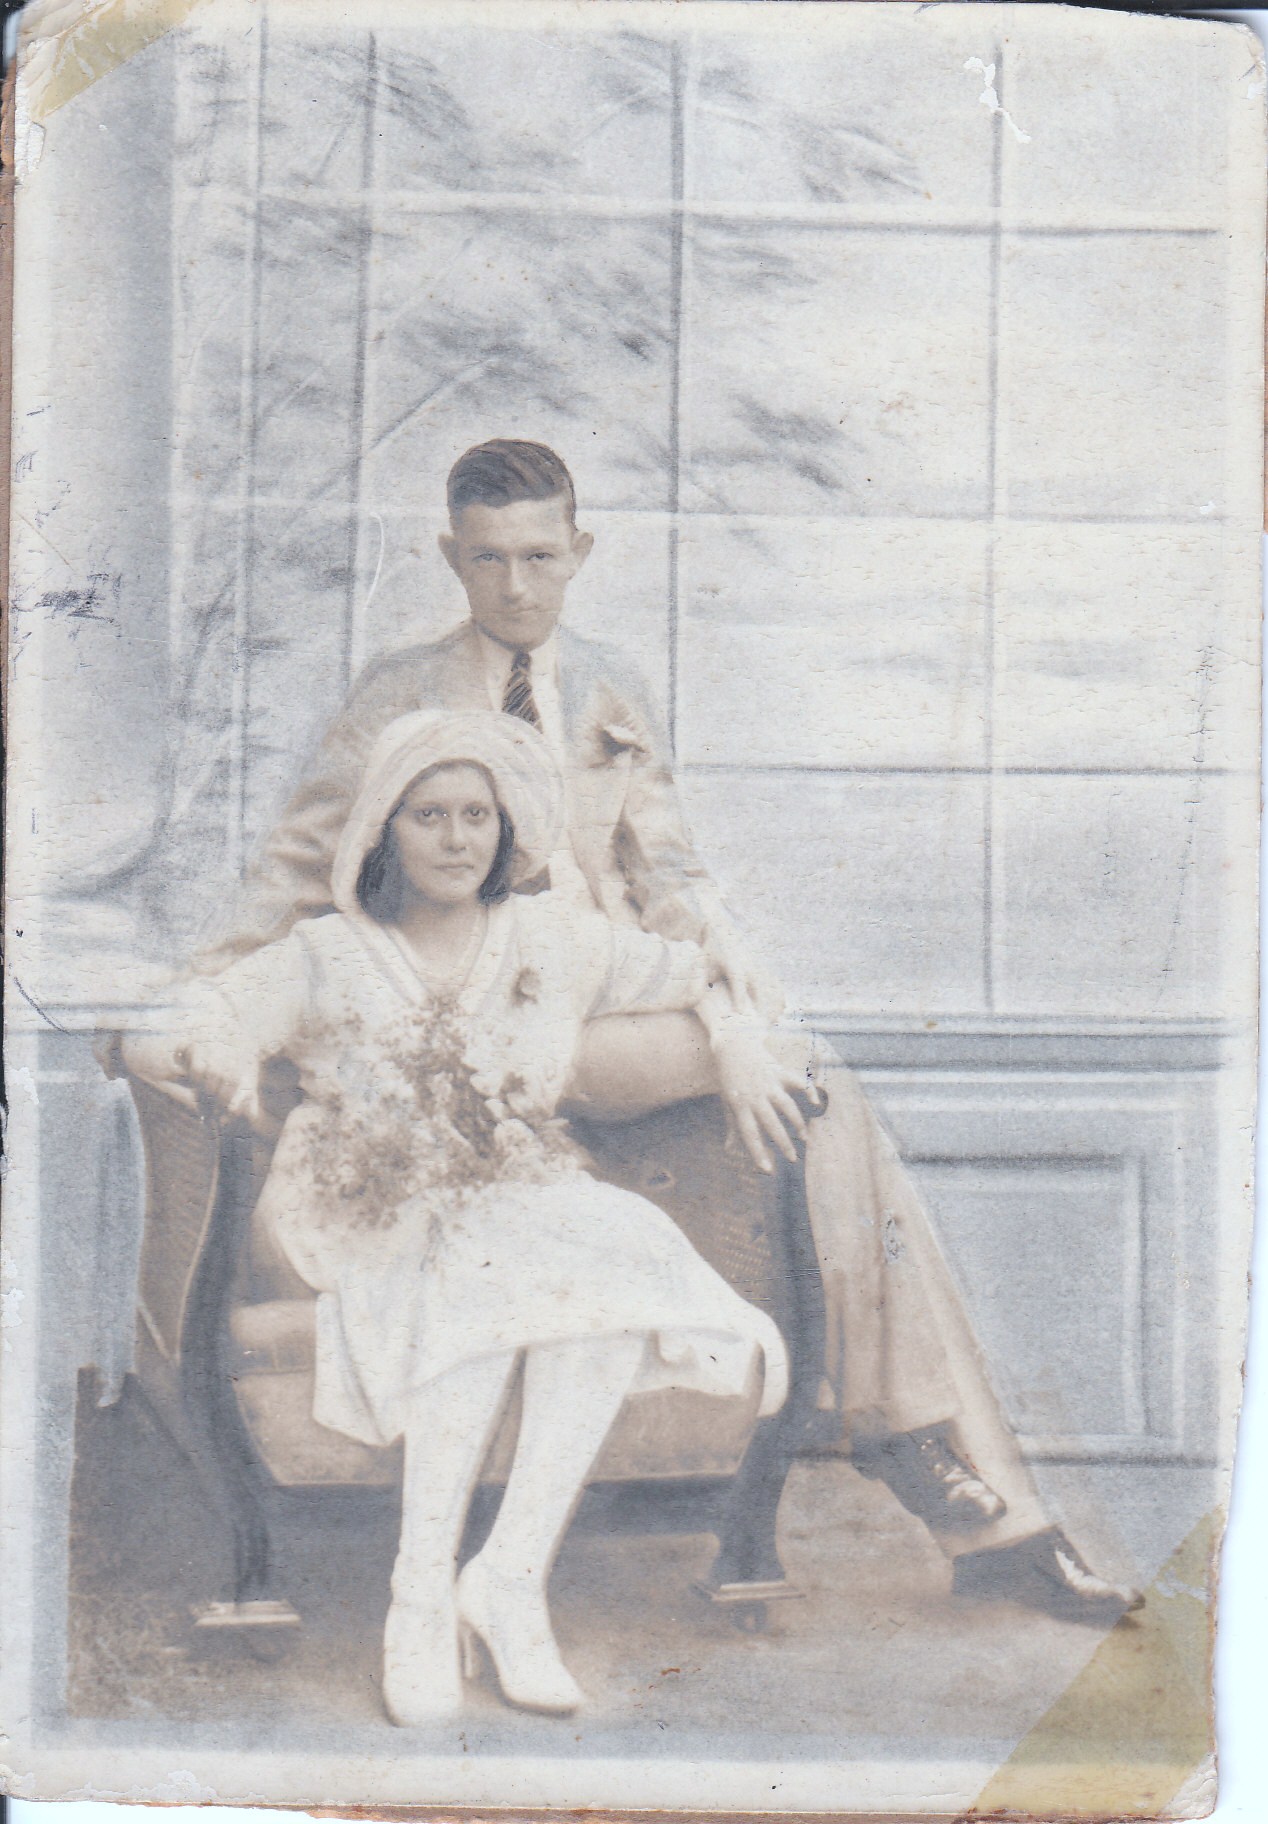 pale, faded semi-coloured photo\' of a woman in white, including a knee-length dress and big floppy hat, holding a bouquet and seated in a wide Oriental armchair, with a young man in a light-coloured suit perched on the arm on her left, and a big window or screen divided up by thin bars behind them